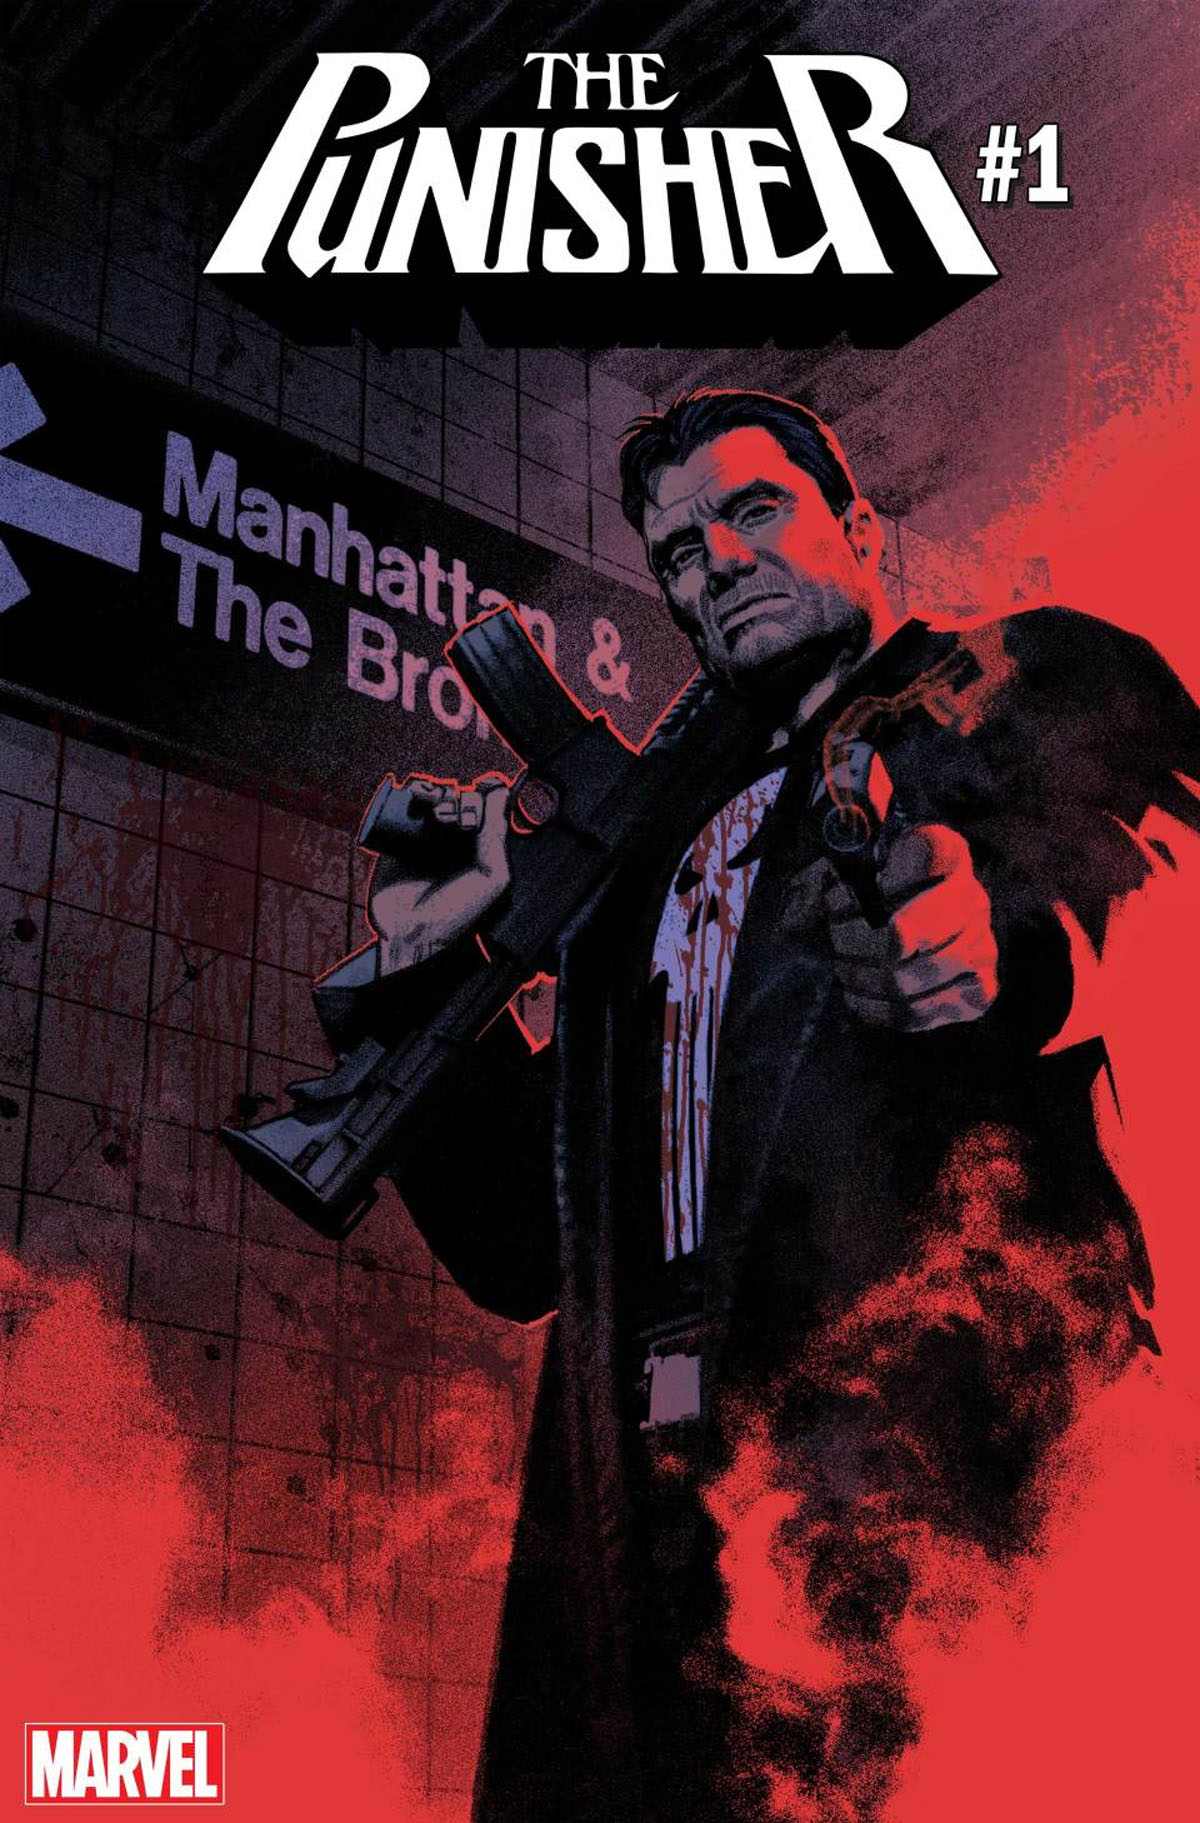 The Punisher #1 cover